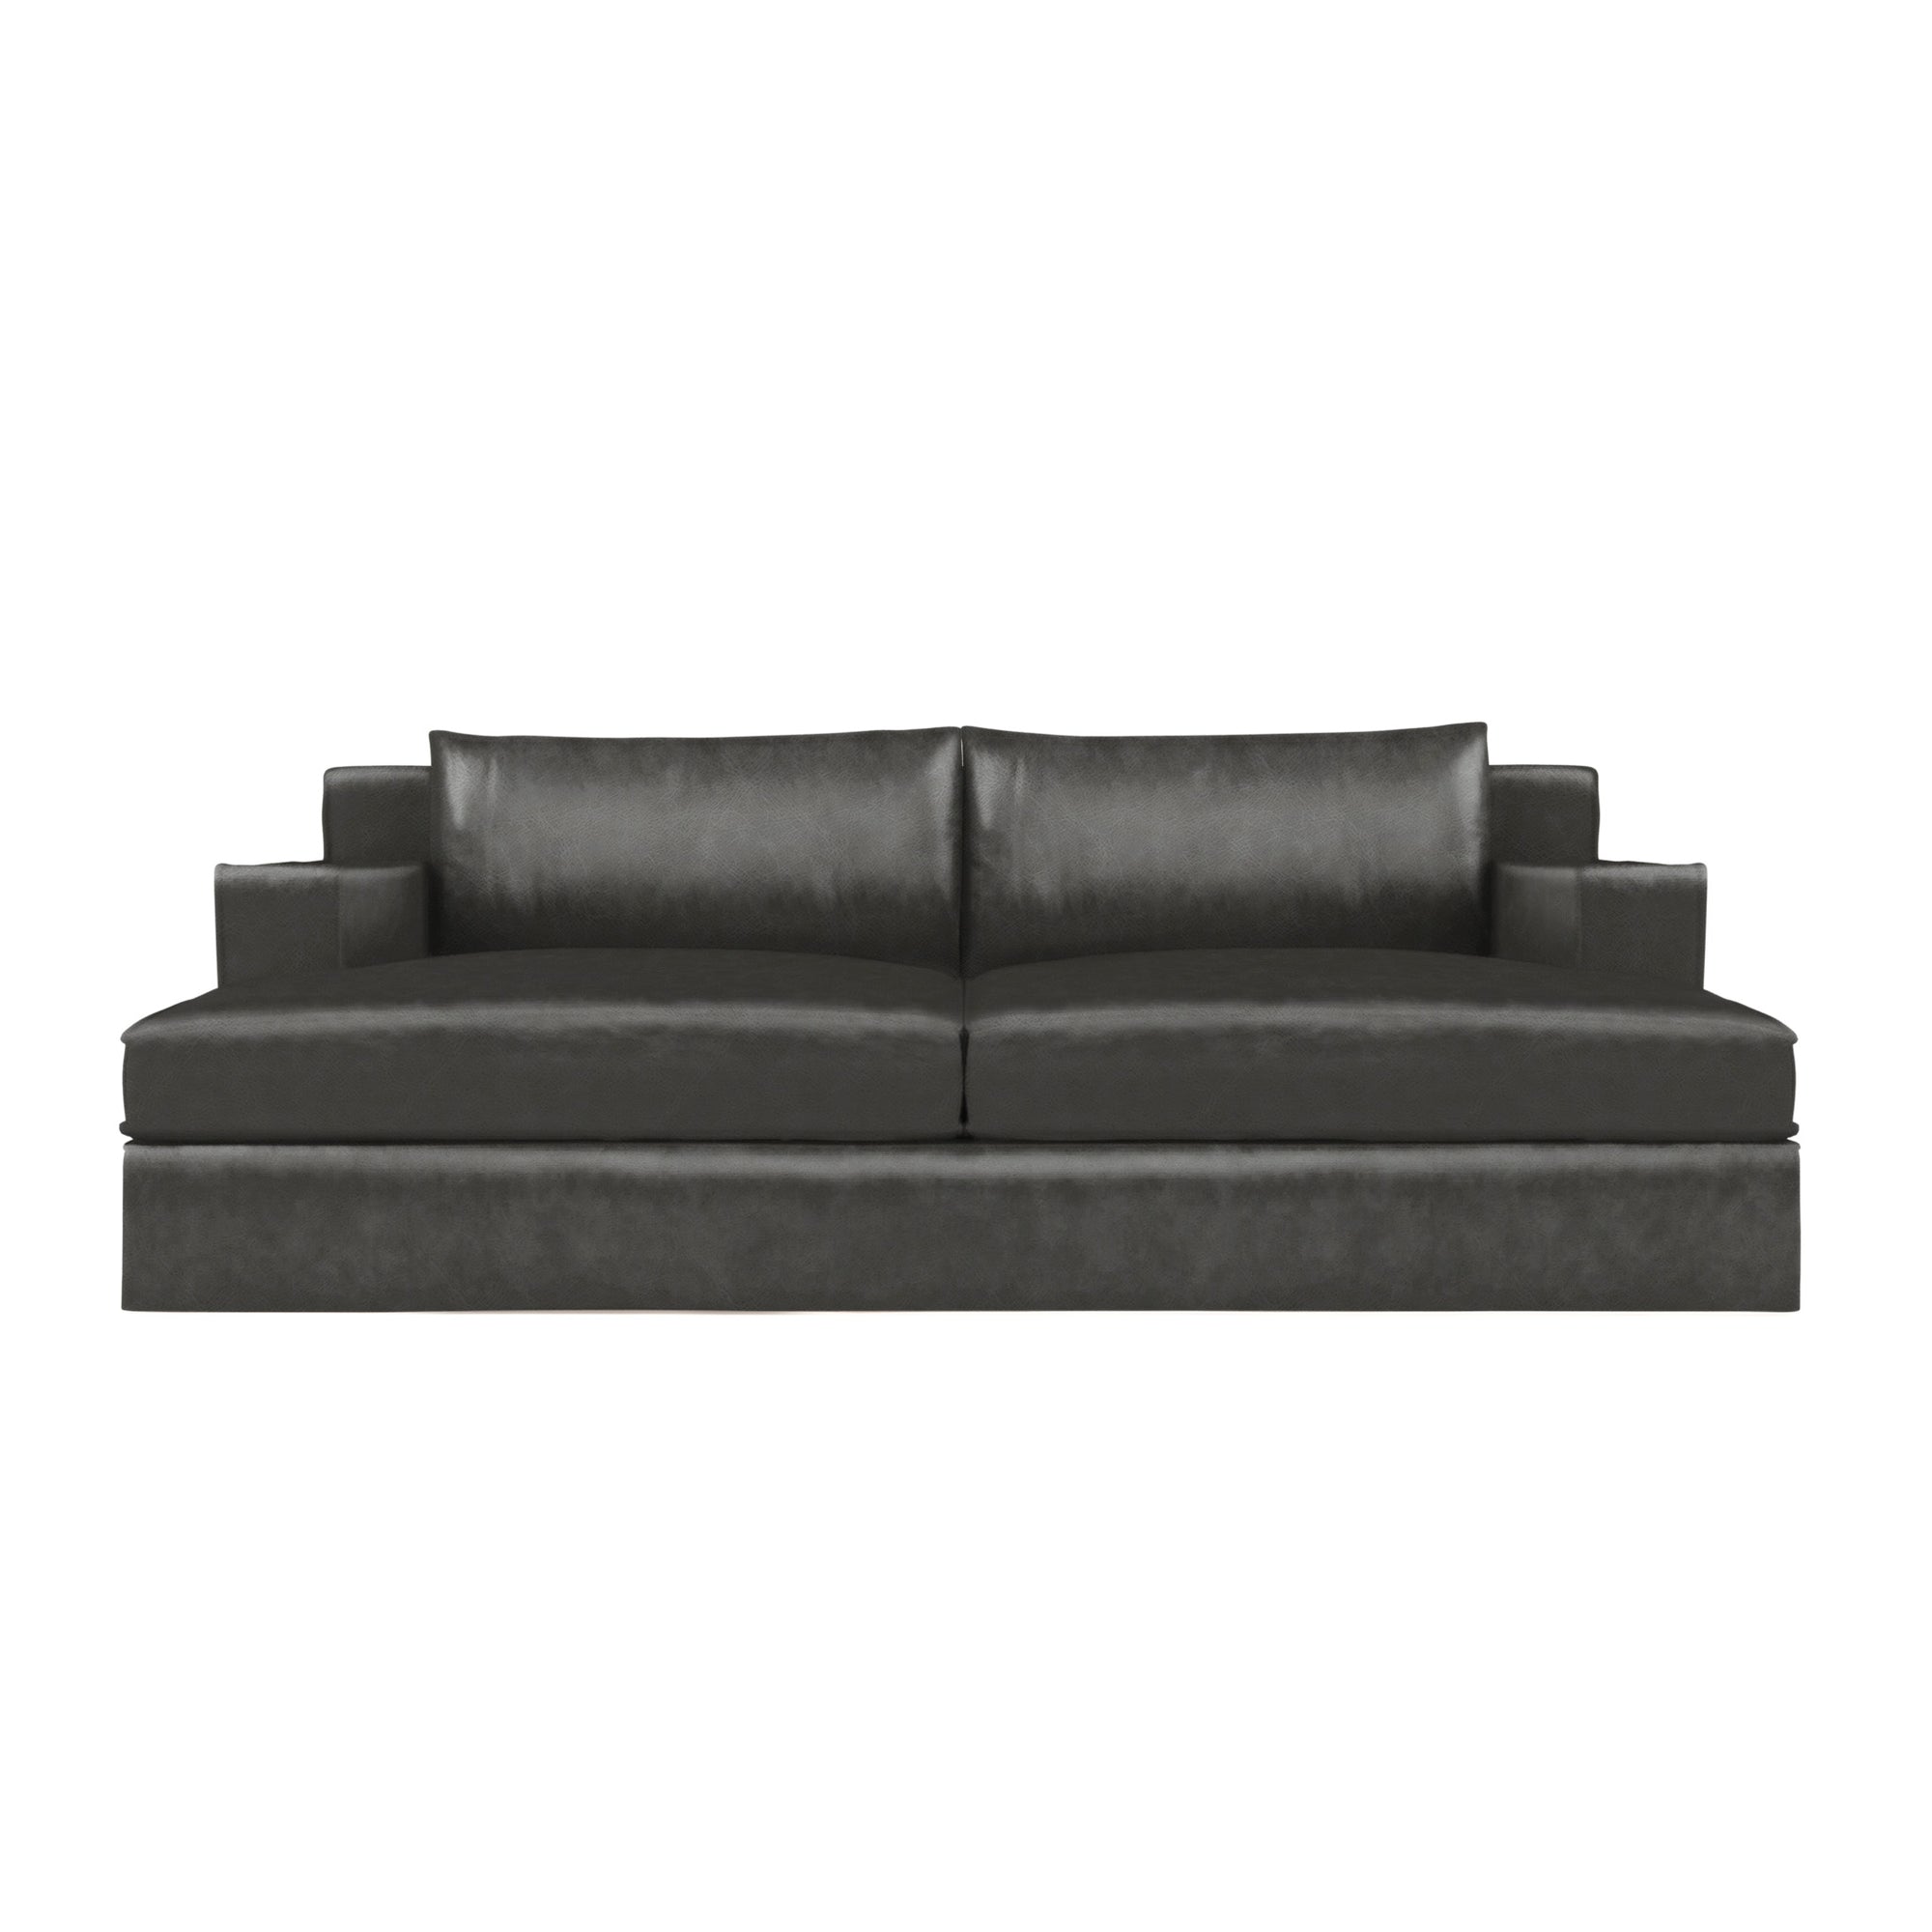 Mulberry Daybed - Graphite Vintage Leather